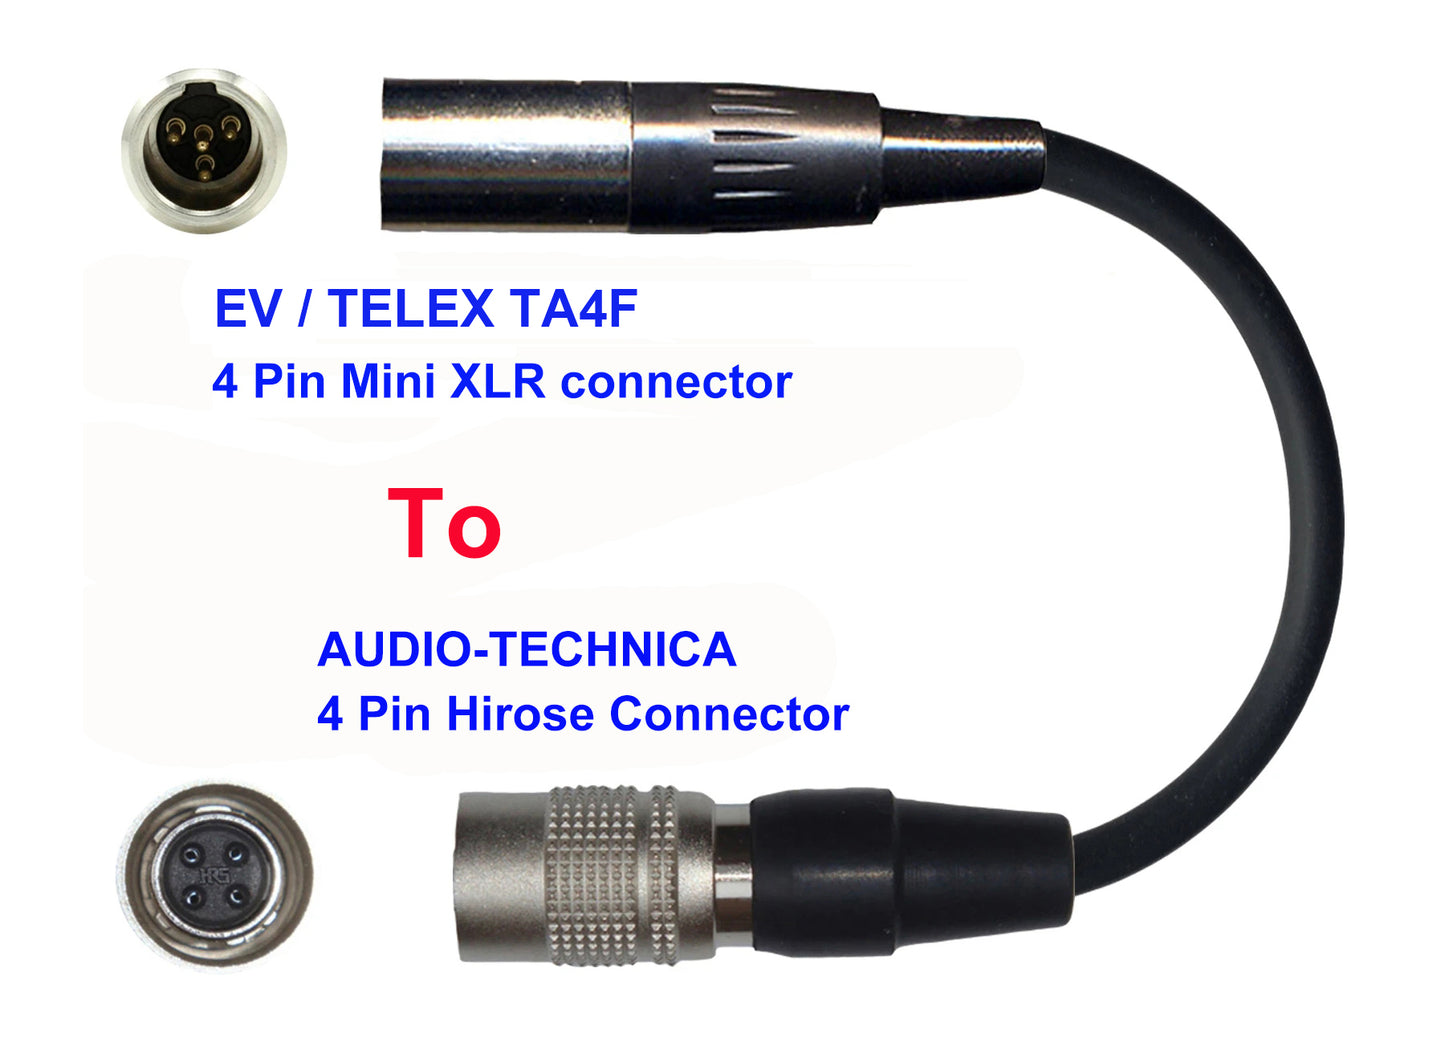 Microphone Adapter - EV / Telex Microphones with TA4F 4 pin mini XLR connector TO Audio-Technica Transmitters with 4 pin TA4M connector